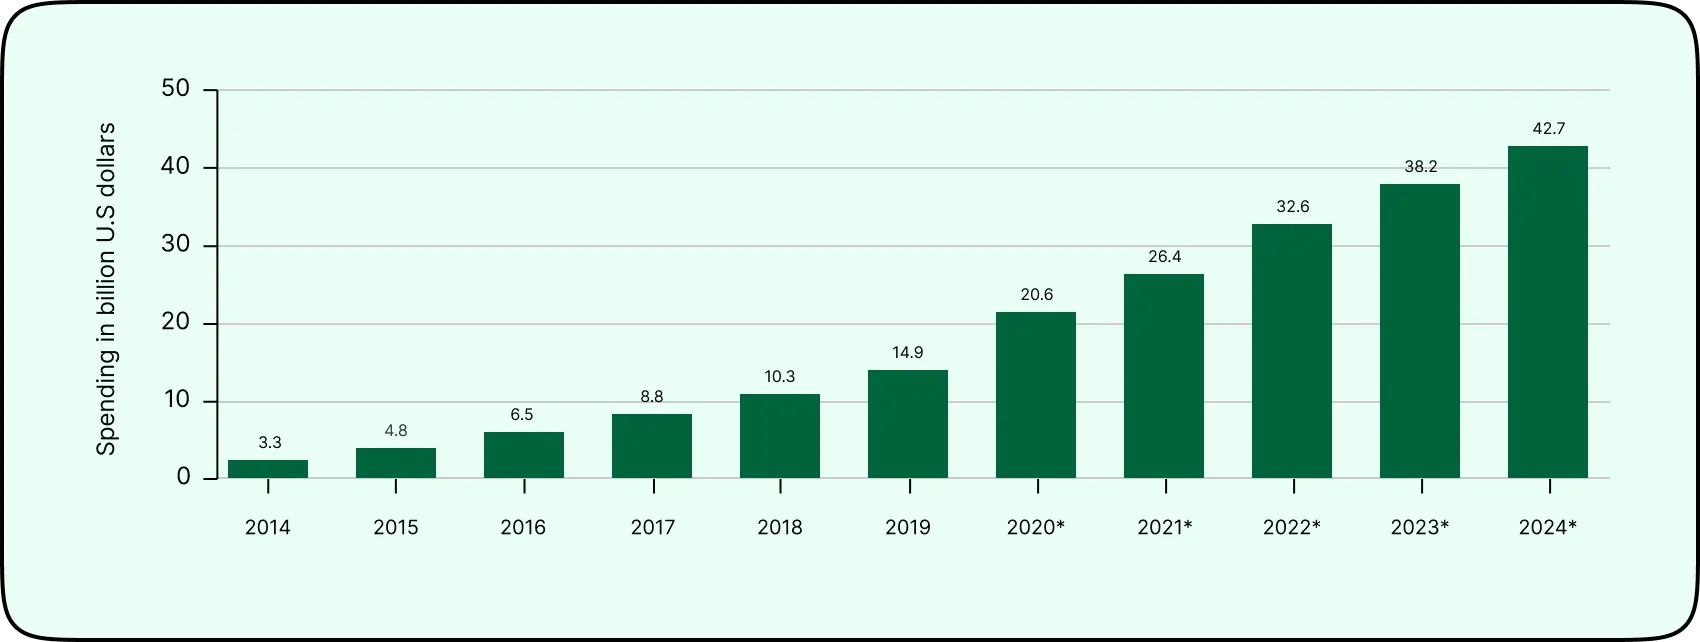 Legal adult-use cannabis sales worldwide from 2020 to 2025